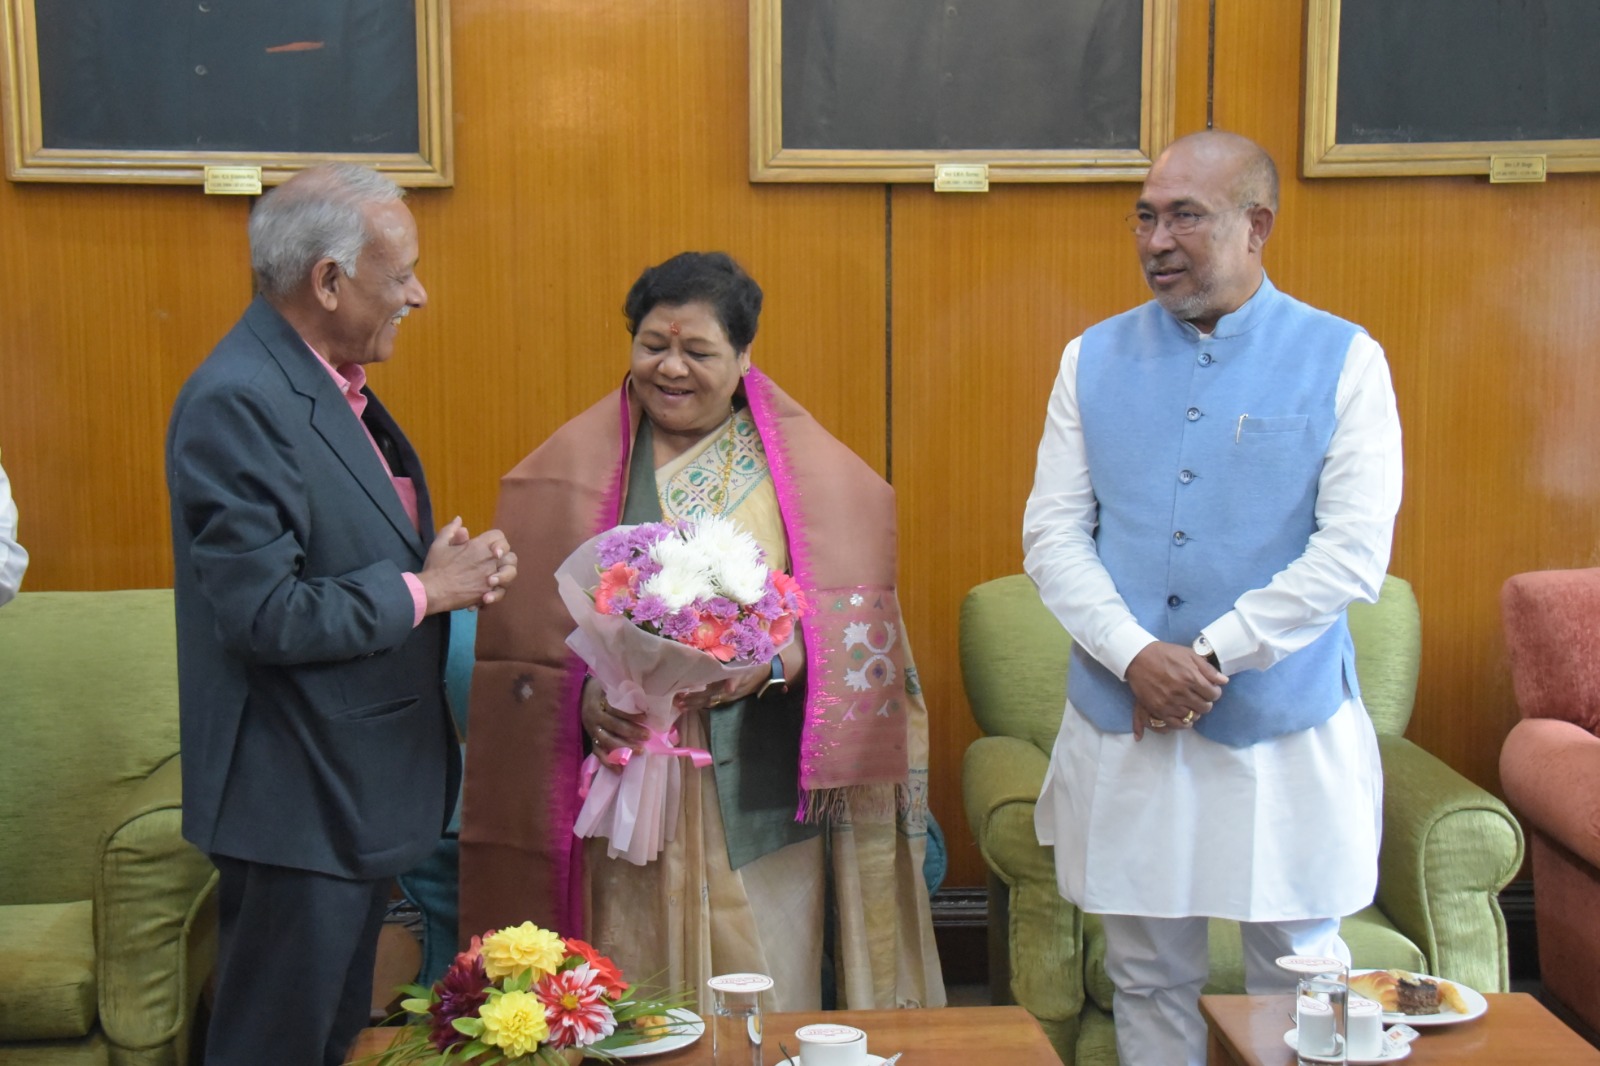 Hon’ble Vice-Chancellor, CAU, Imphal Dr. Anupam Mishra attended the Swearing-in-Ceremony of Sushri Anusuiya Uikey as Governor of Manipur at Darbar Hall of Raj Bhavan, Imphal on 22nd February, 2023